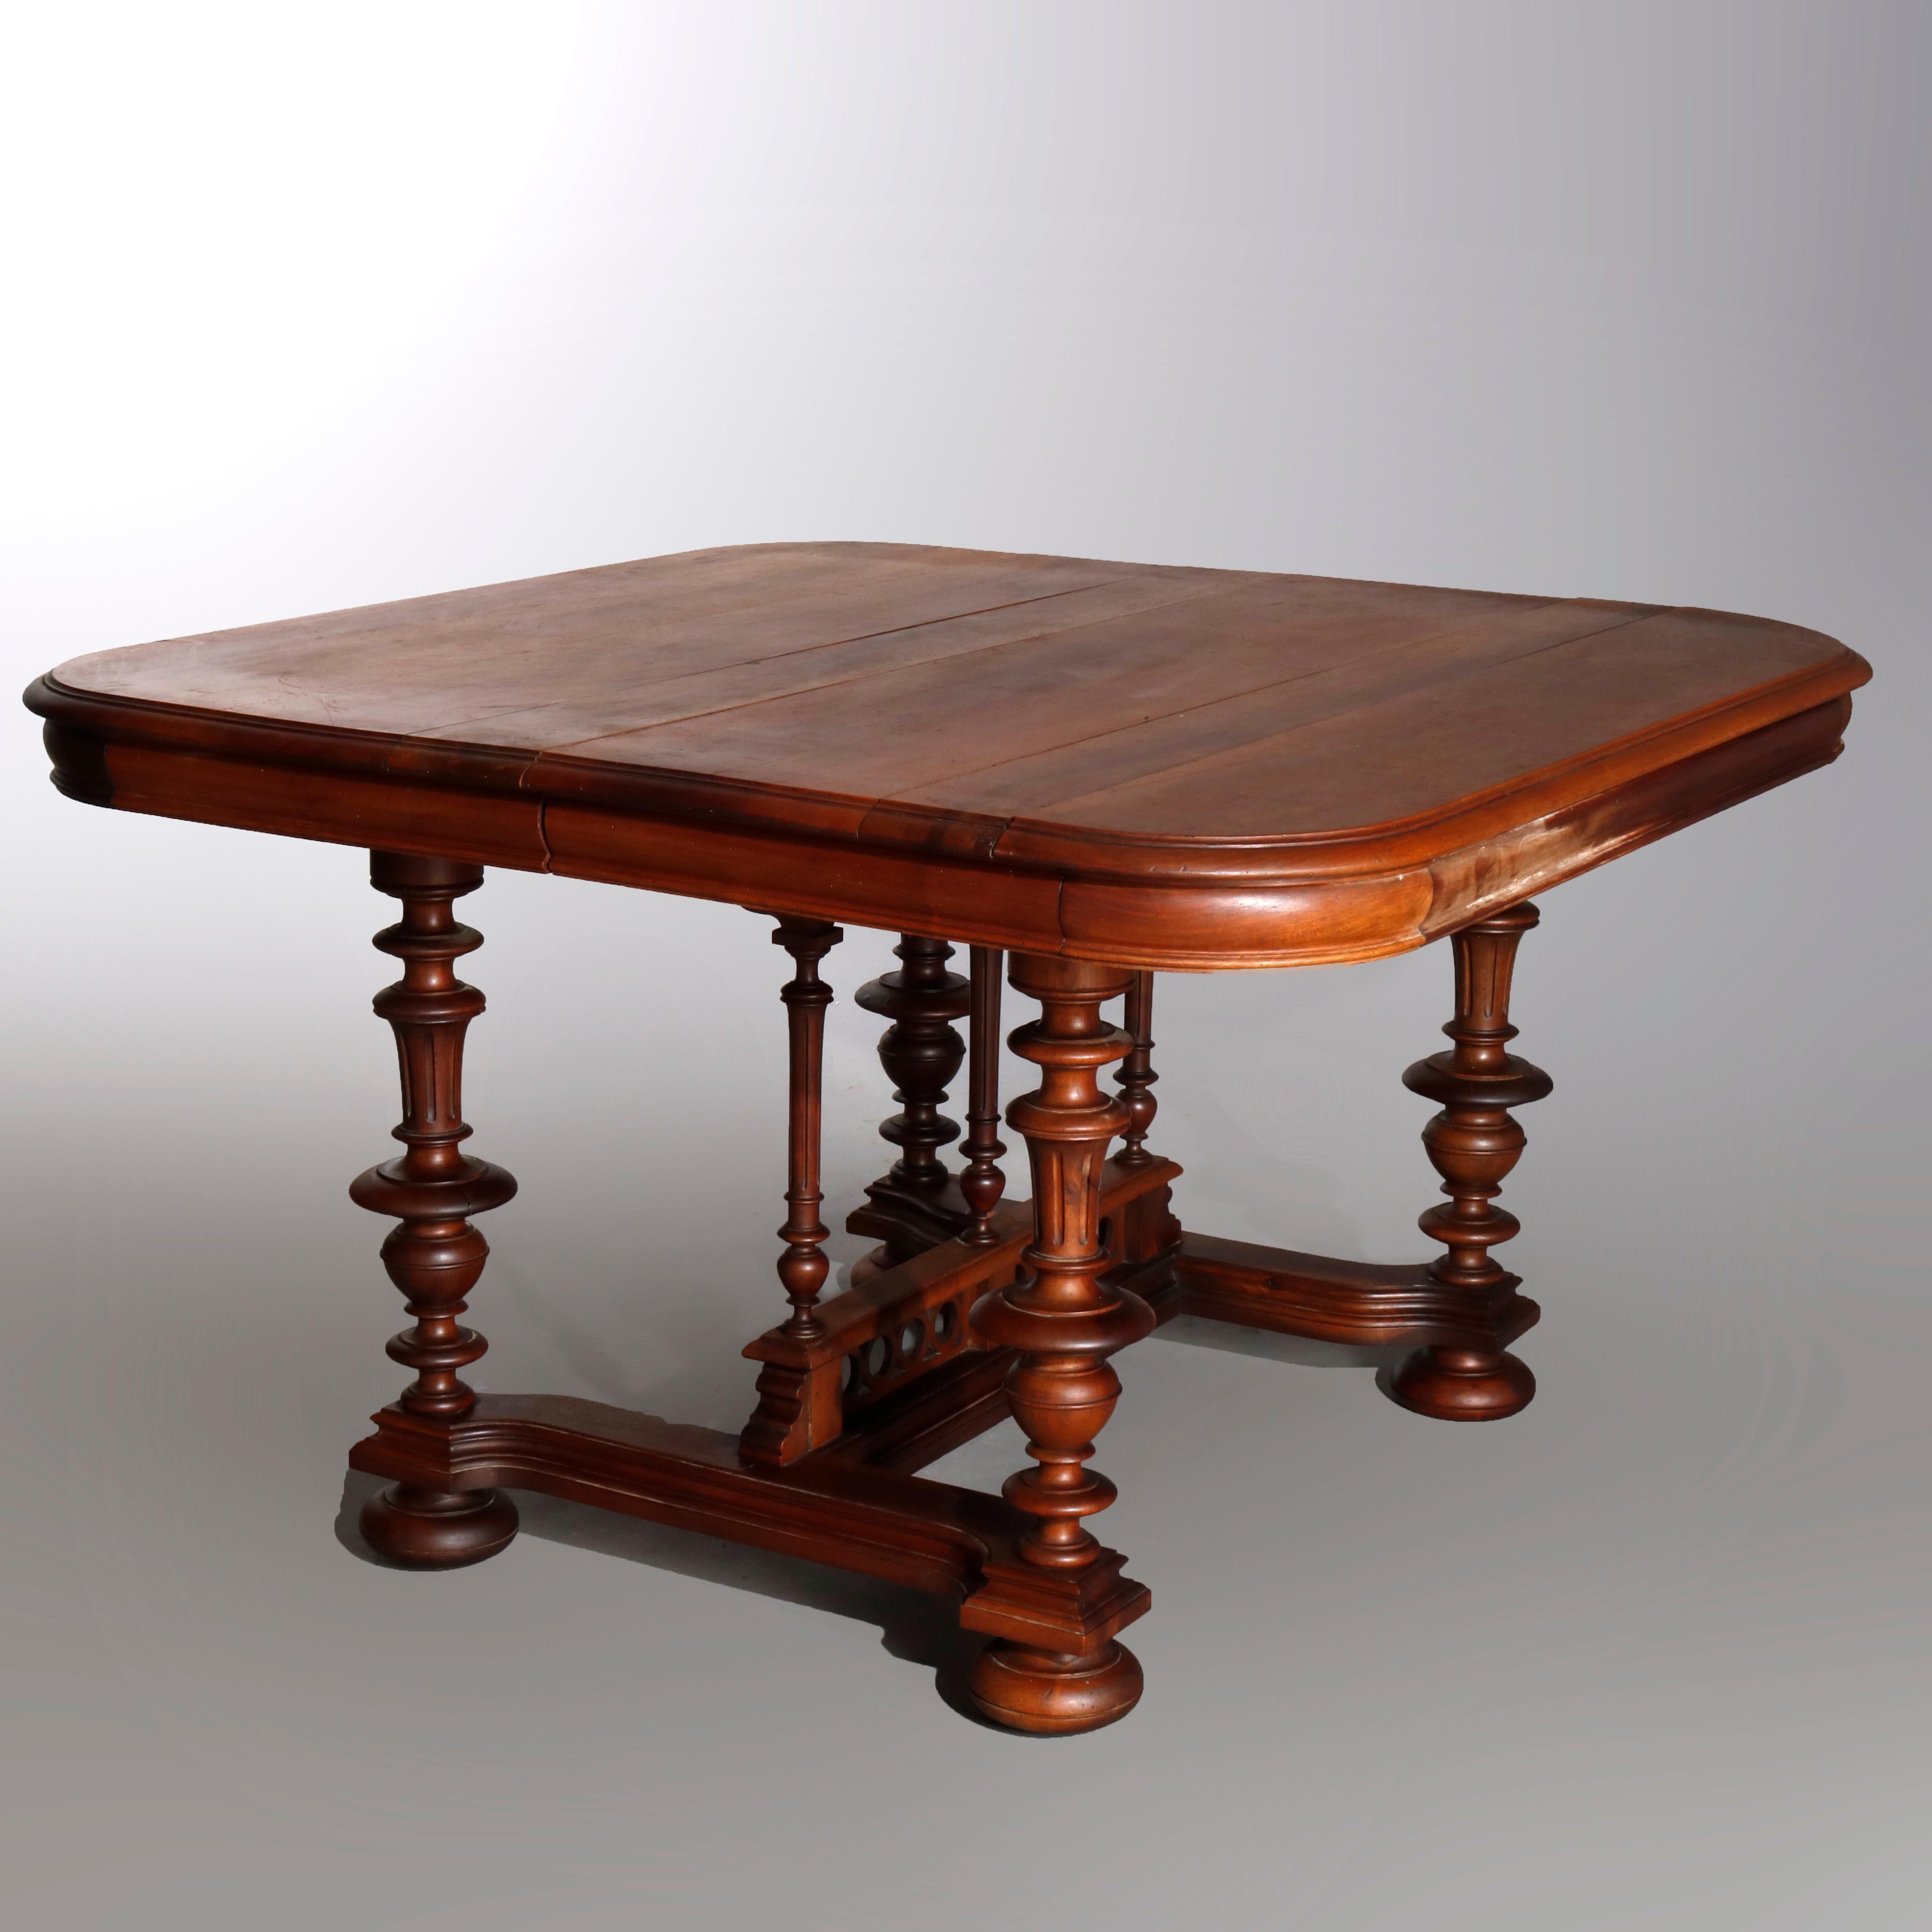 Antique French Renaissance carved walnut extension dining table with curved corner top over deep skirt, raised on turned urn form legs with H-stretcher having central turned column supports and bun feet, 19th century

Measures: 27.5